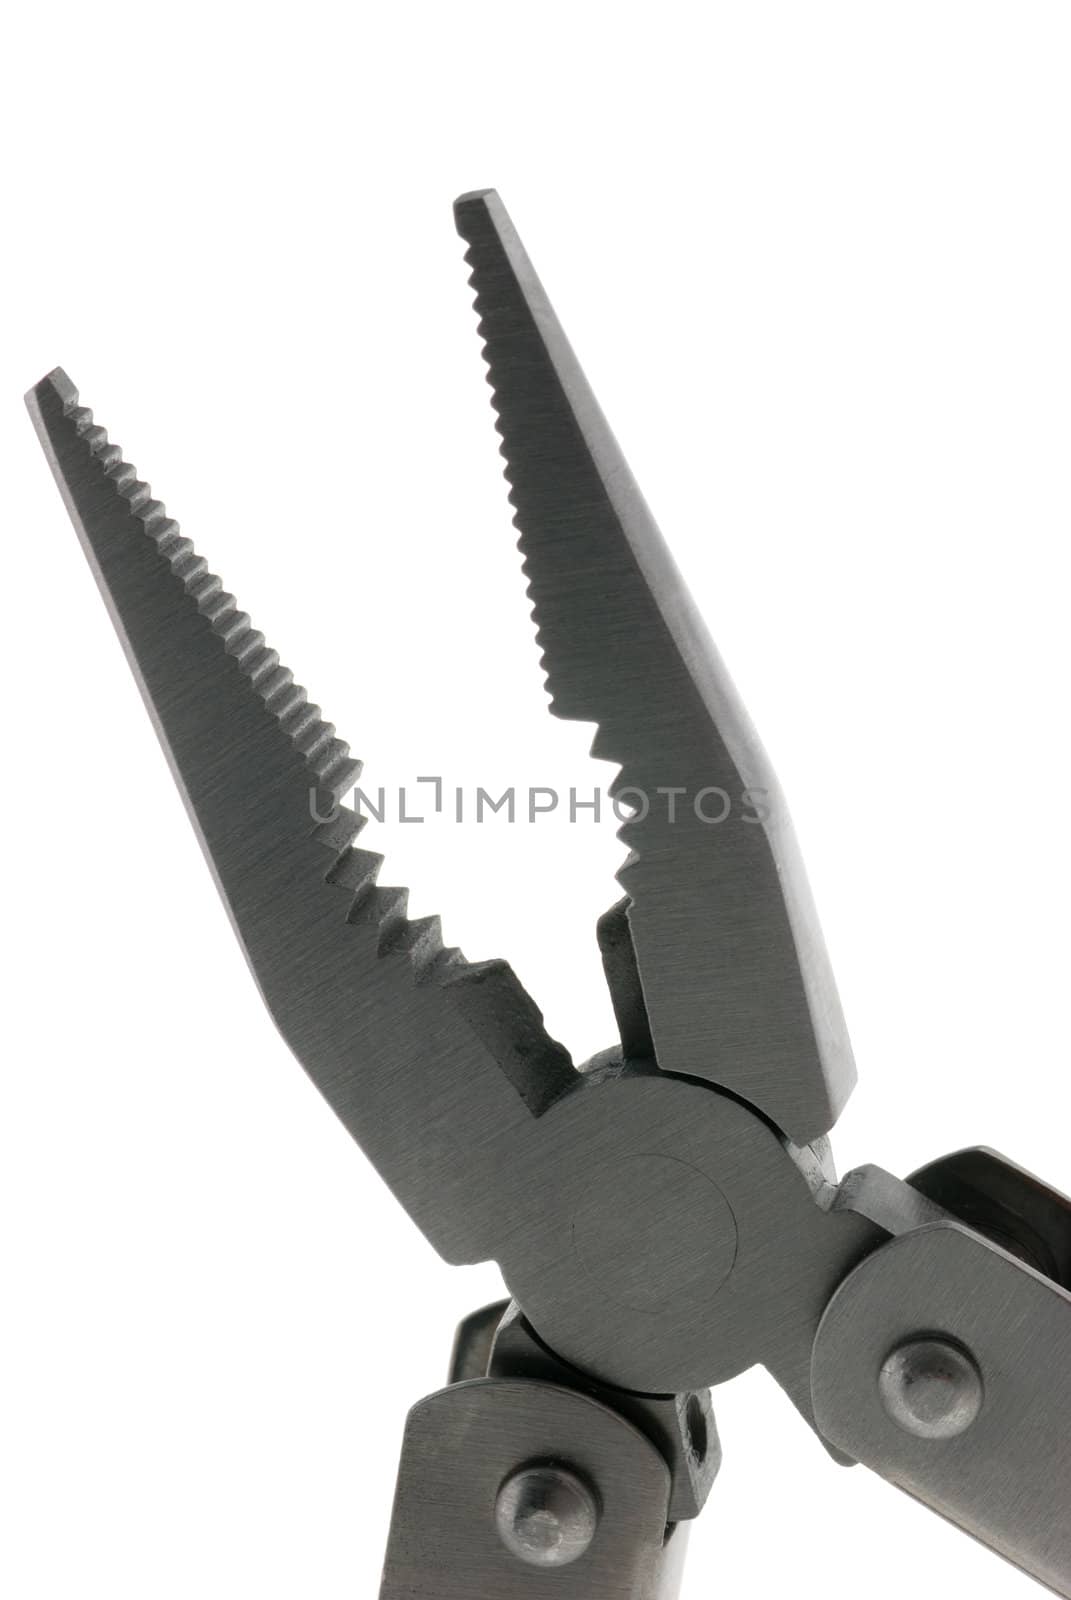 pliers. The manual tool from the chromeplated steel, isolated on a white background